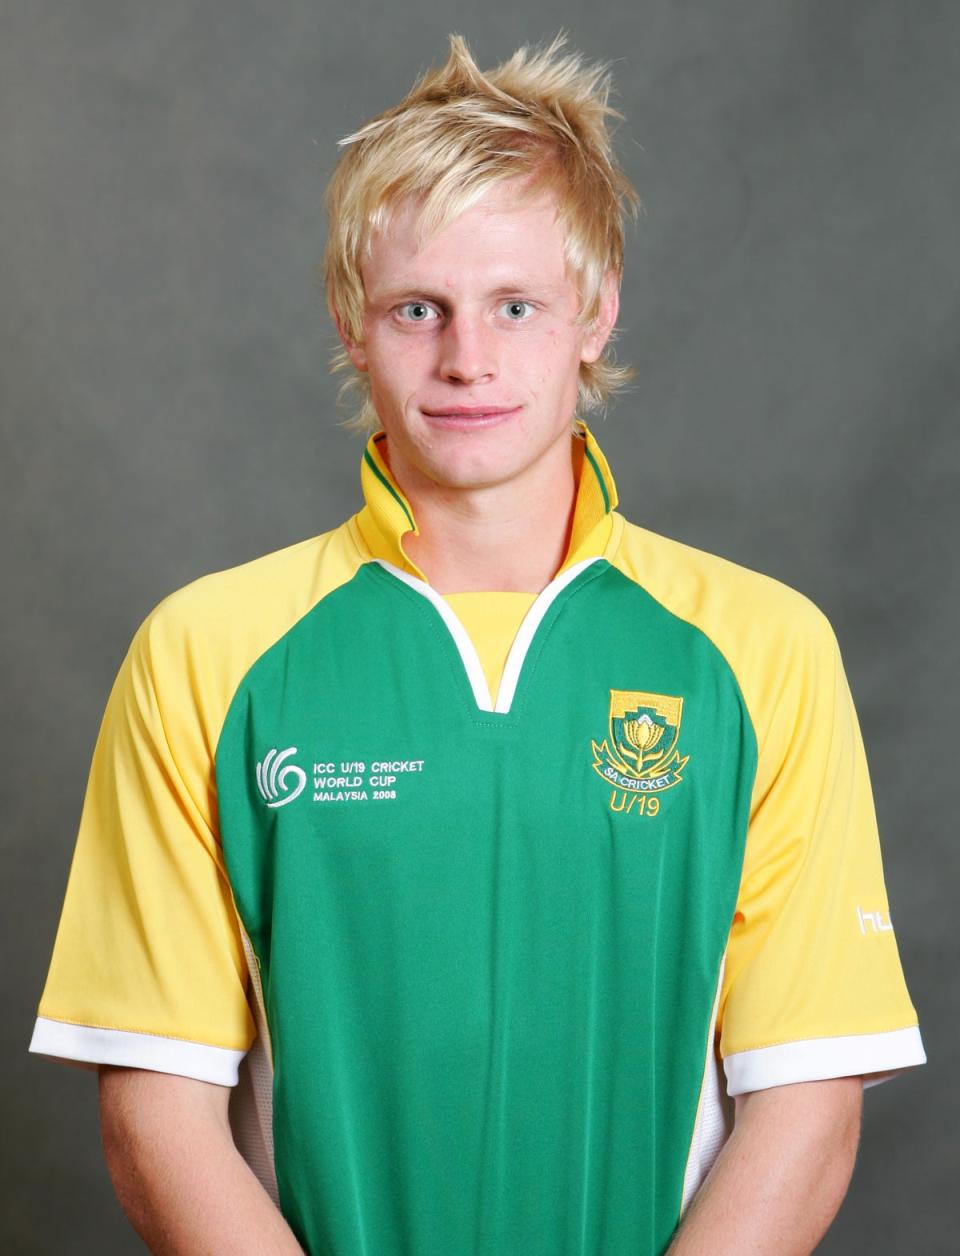 Sybrand Engelbrecht, who played for South Africa during the ICC U/19 Cricket World Cup, poses for an official team photo call at the Sunway Hotel on 13 February 2008 in Kuala Lumpur (Getty Images)